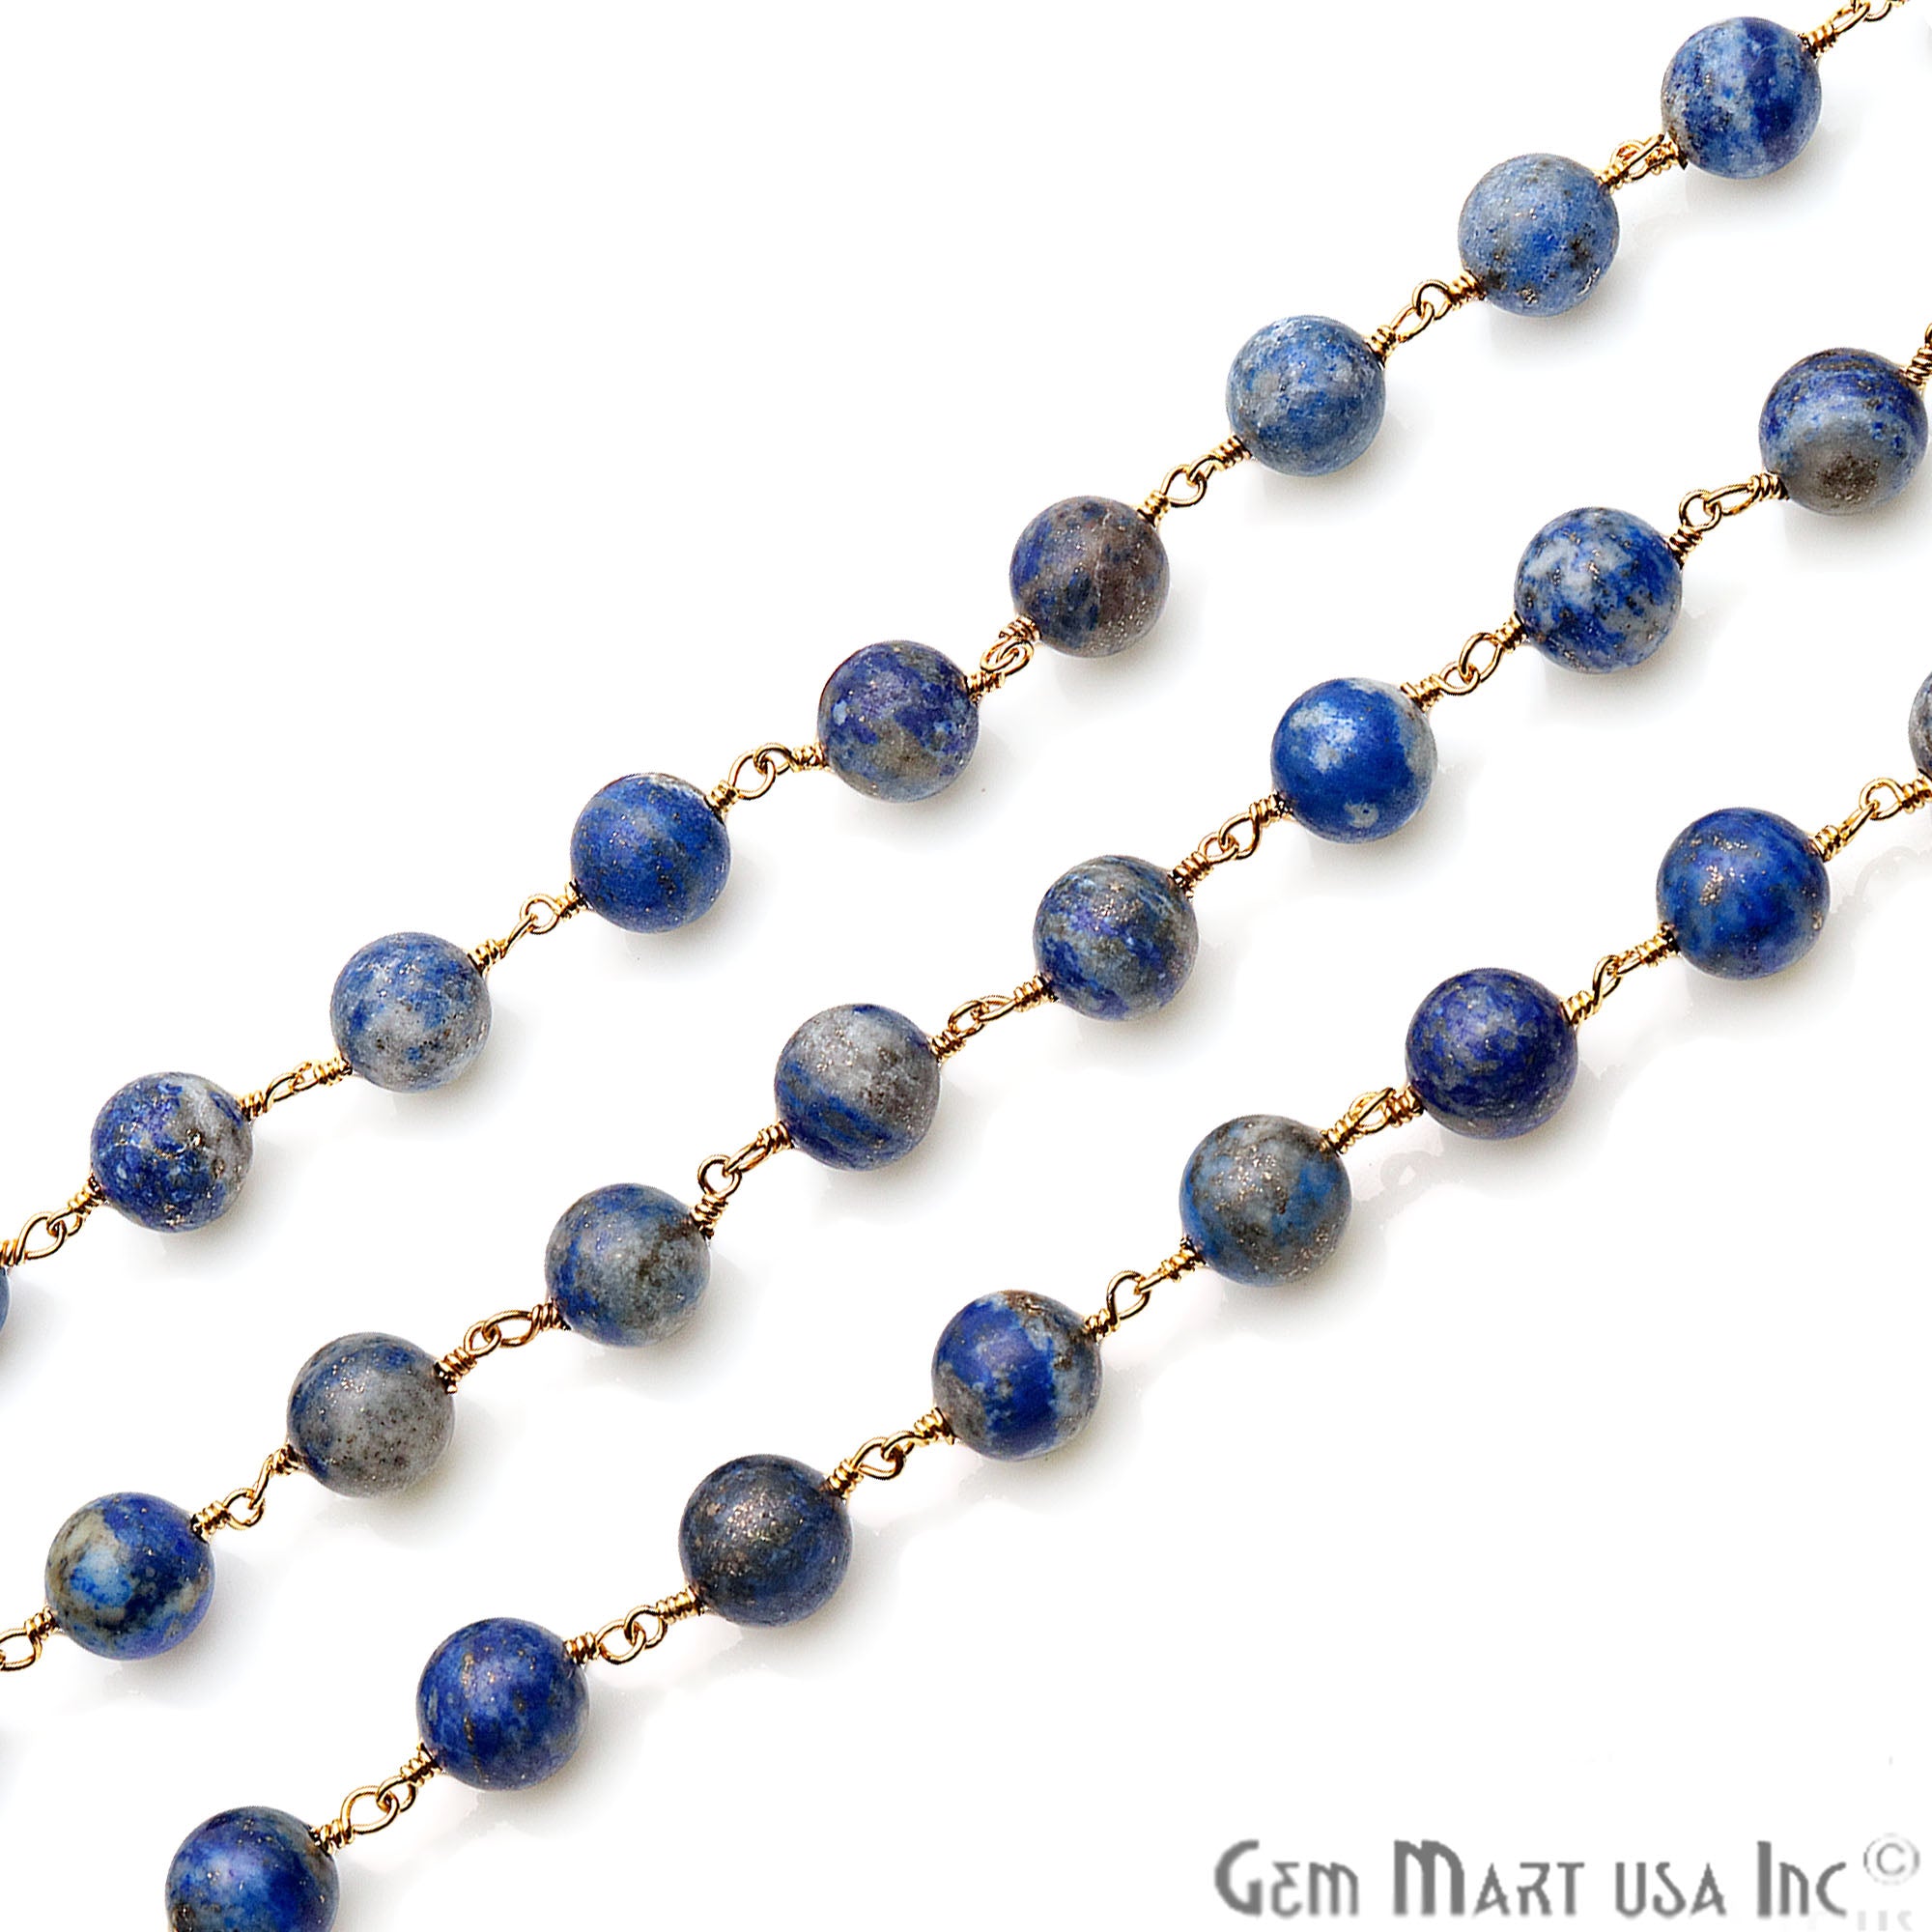 Lapis Smooth Beads 8mm Gold Plated Wire Wrapped Gemstone Rosary Chain - GemMartUSA